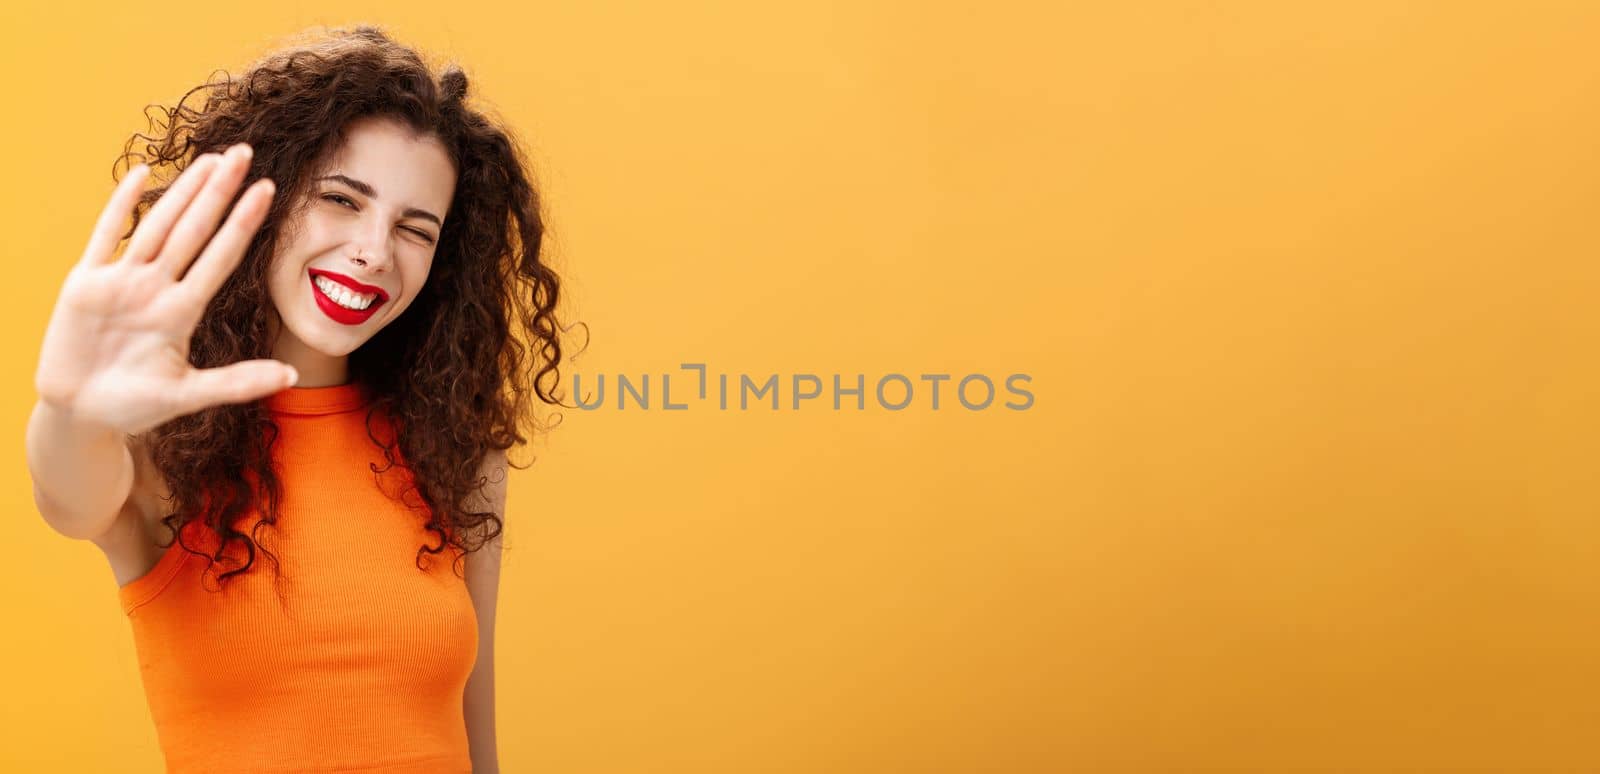 Give me five mate. Stylish friendly and joyful attractive woman with curly hairstyle winking and smiling happily pulling hand towards camera to greet or congratulate friend over orange background. Copy space